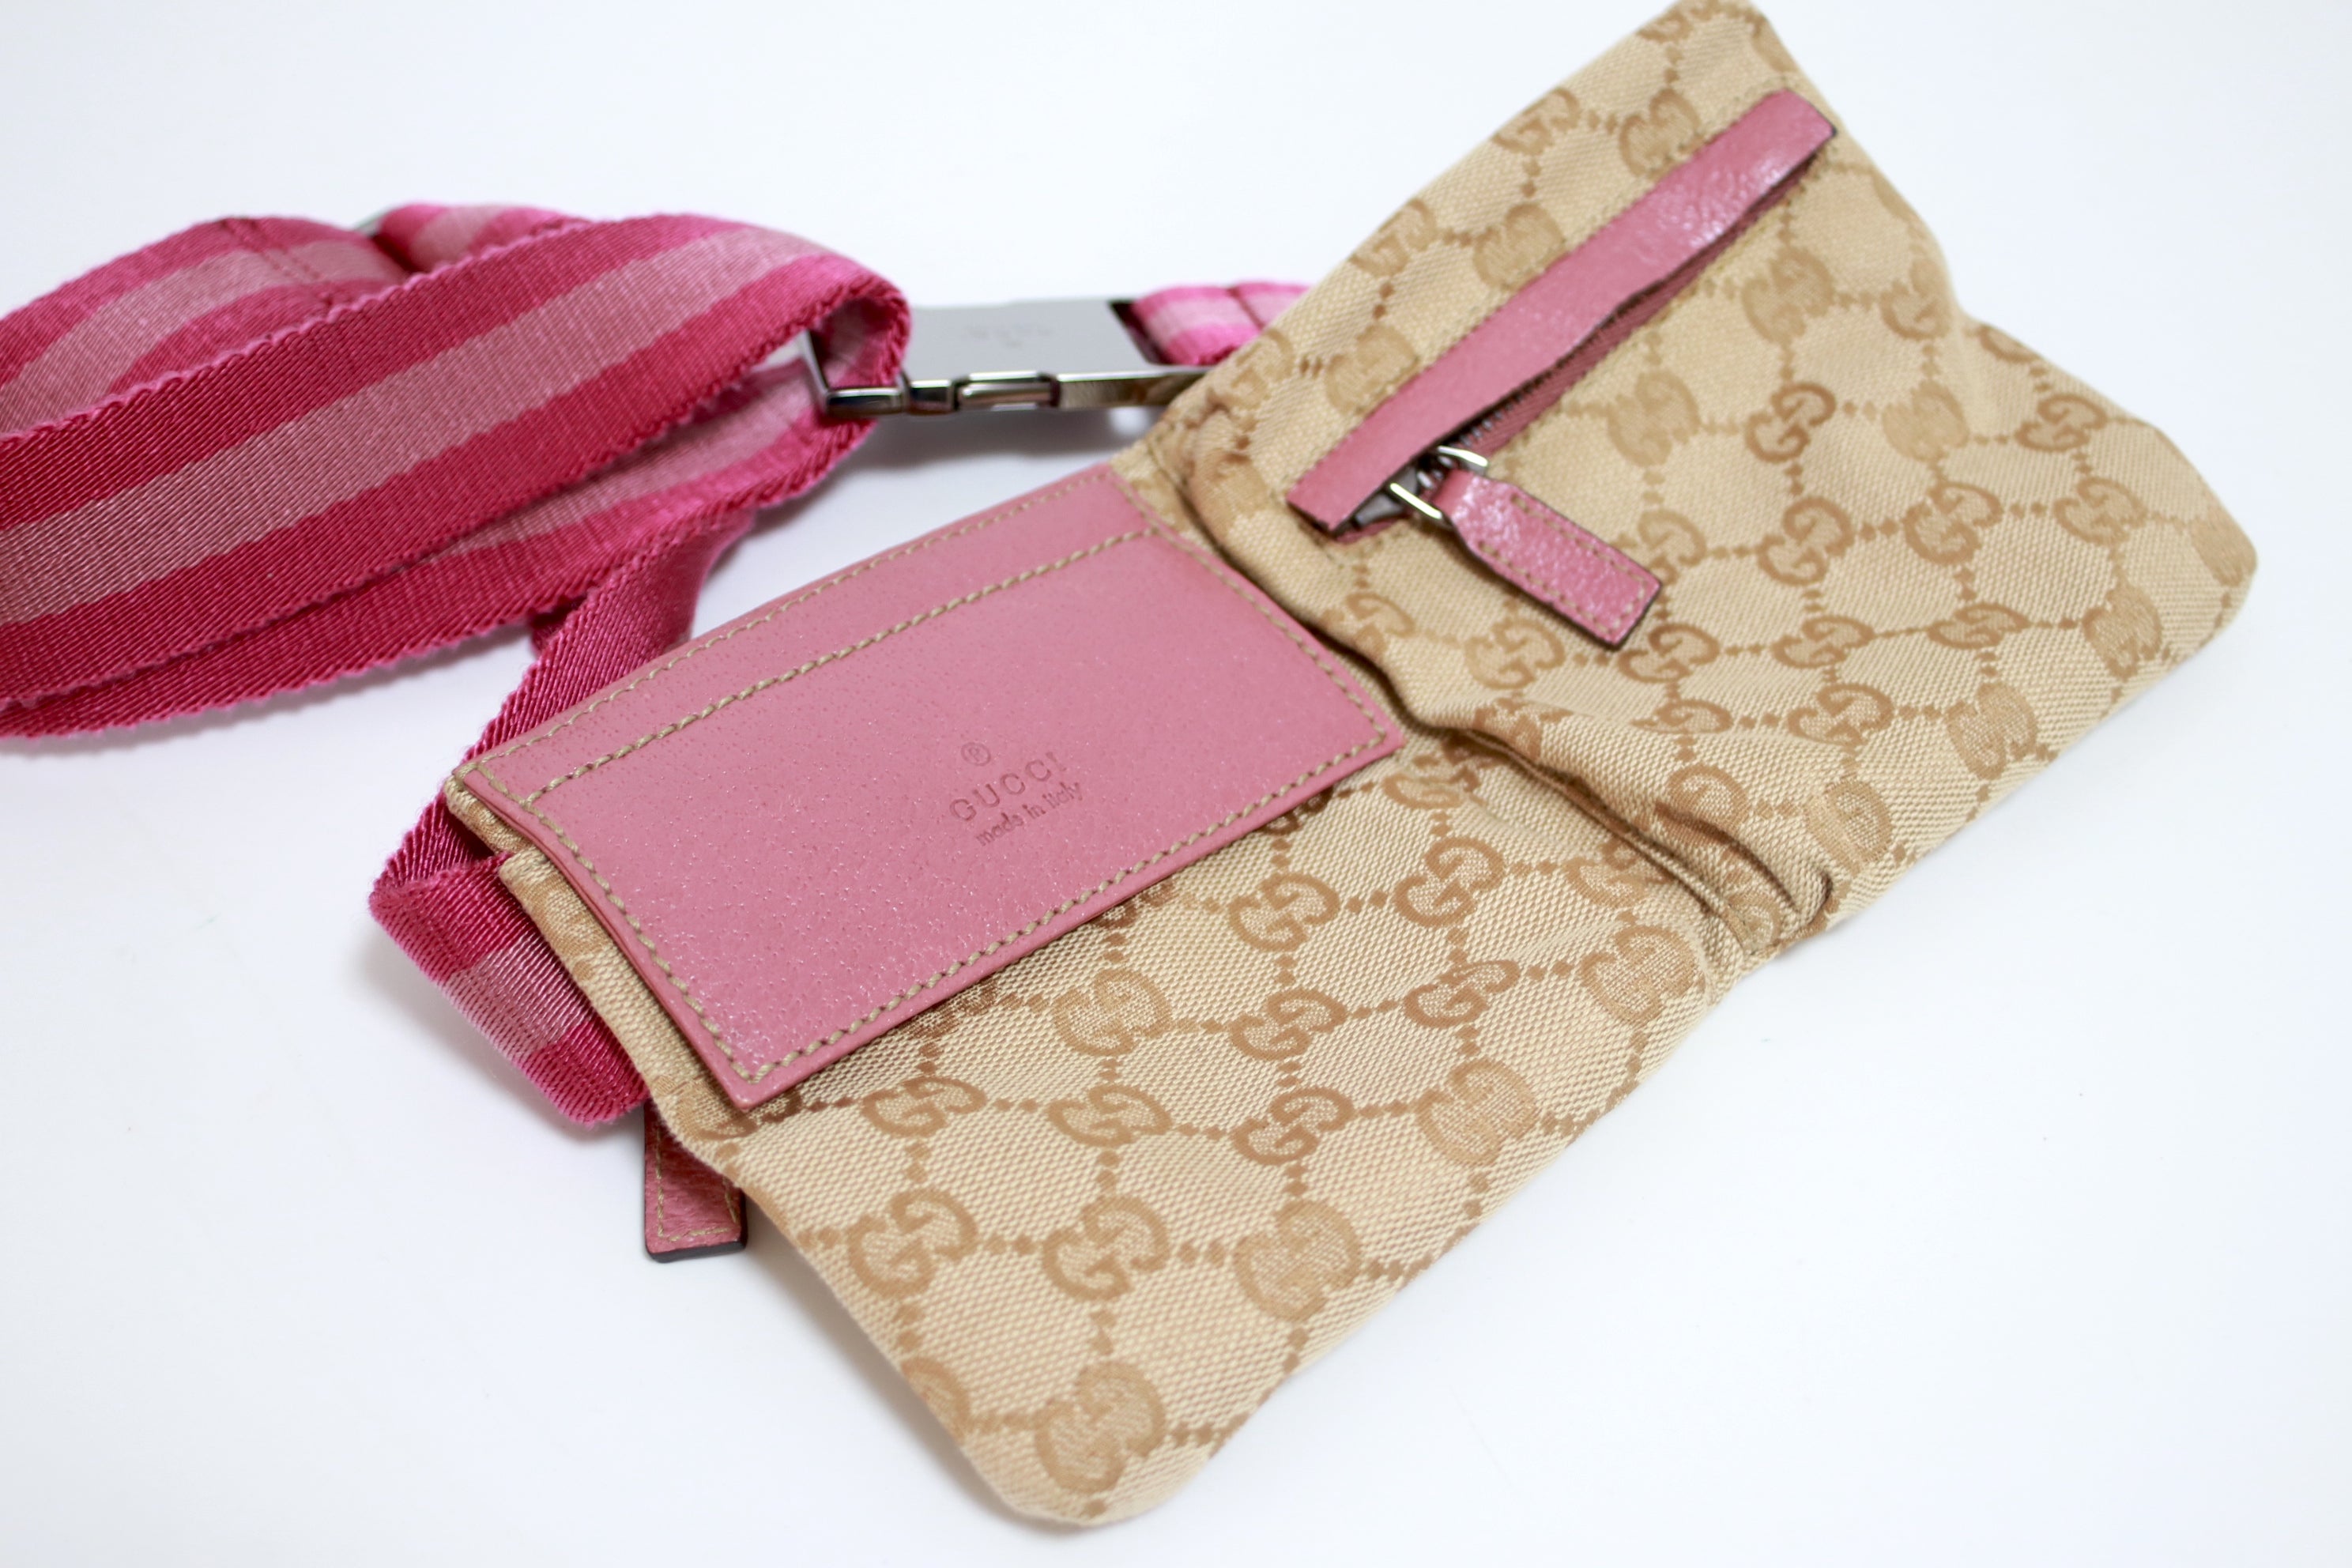 Gucci Waist Bag Pink and Brown Used (7323)